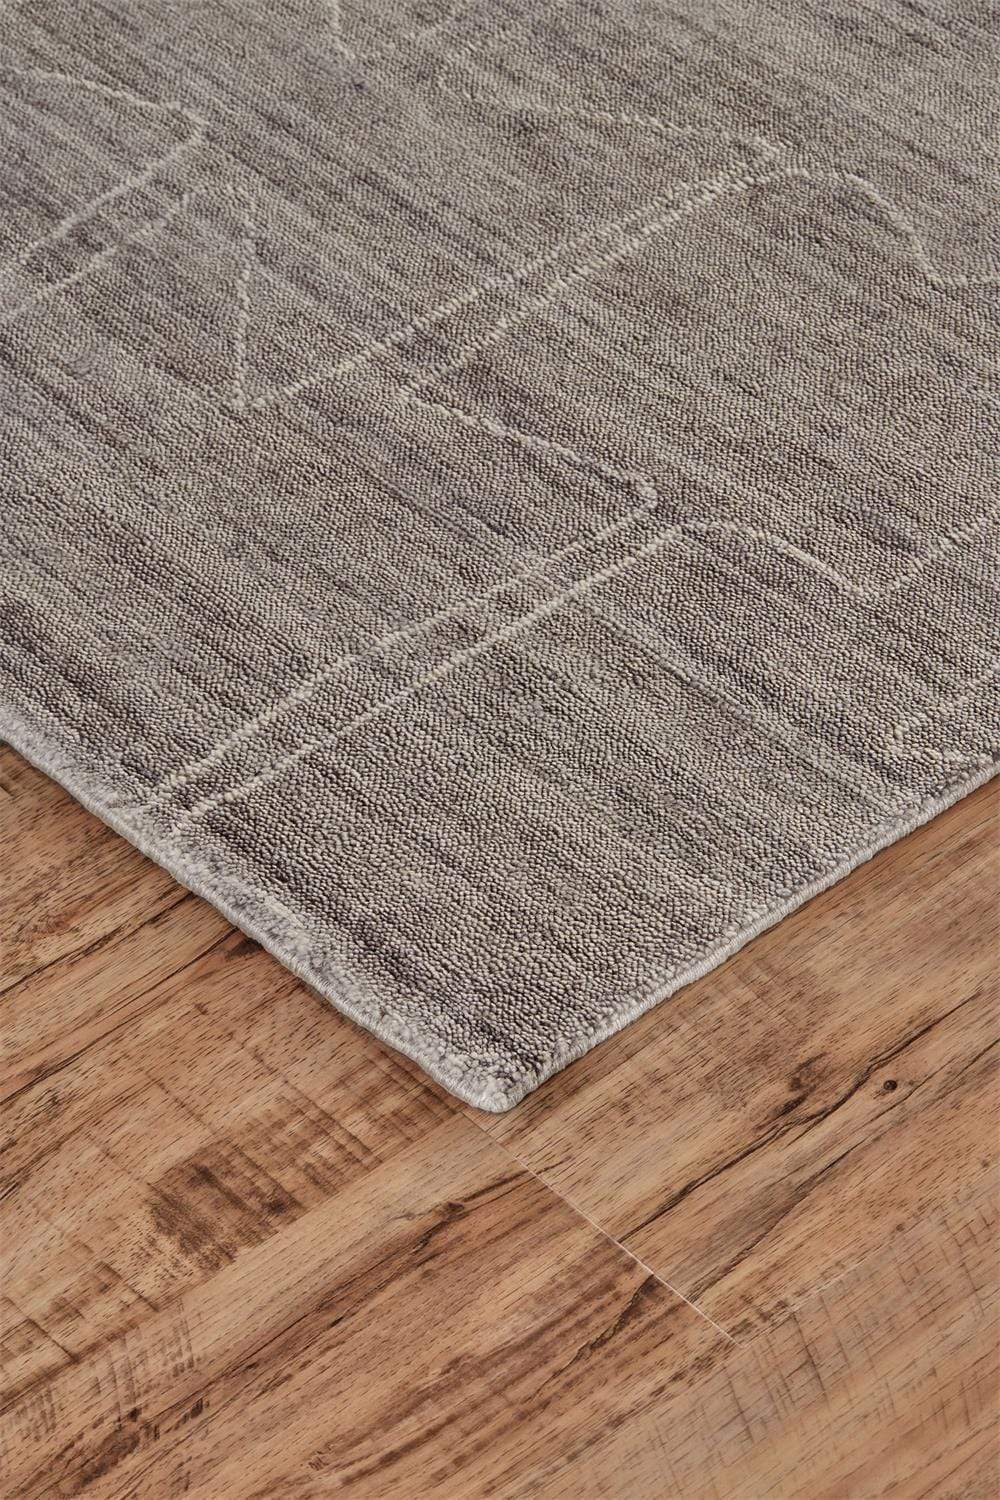 Feizy Feizy Lennox Modern Abstract Minimalist Rug - Taupe & Ivory - Available in 5 Sizes